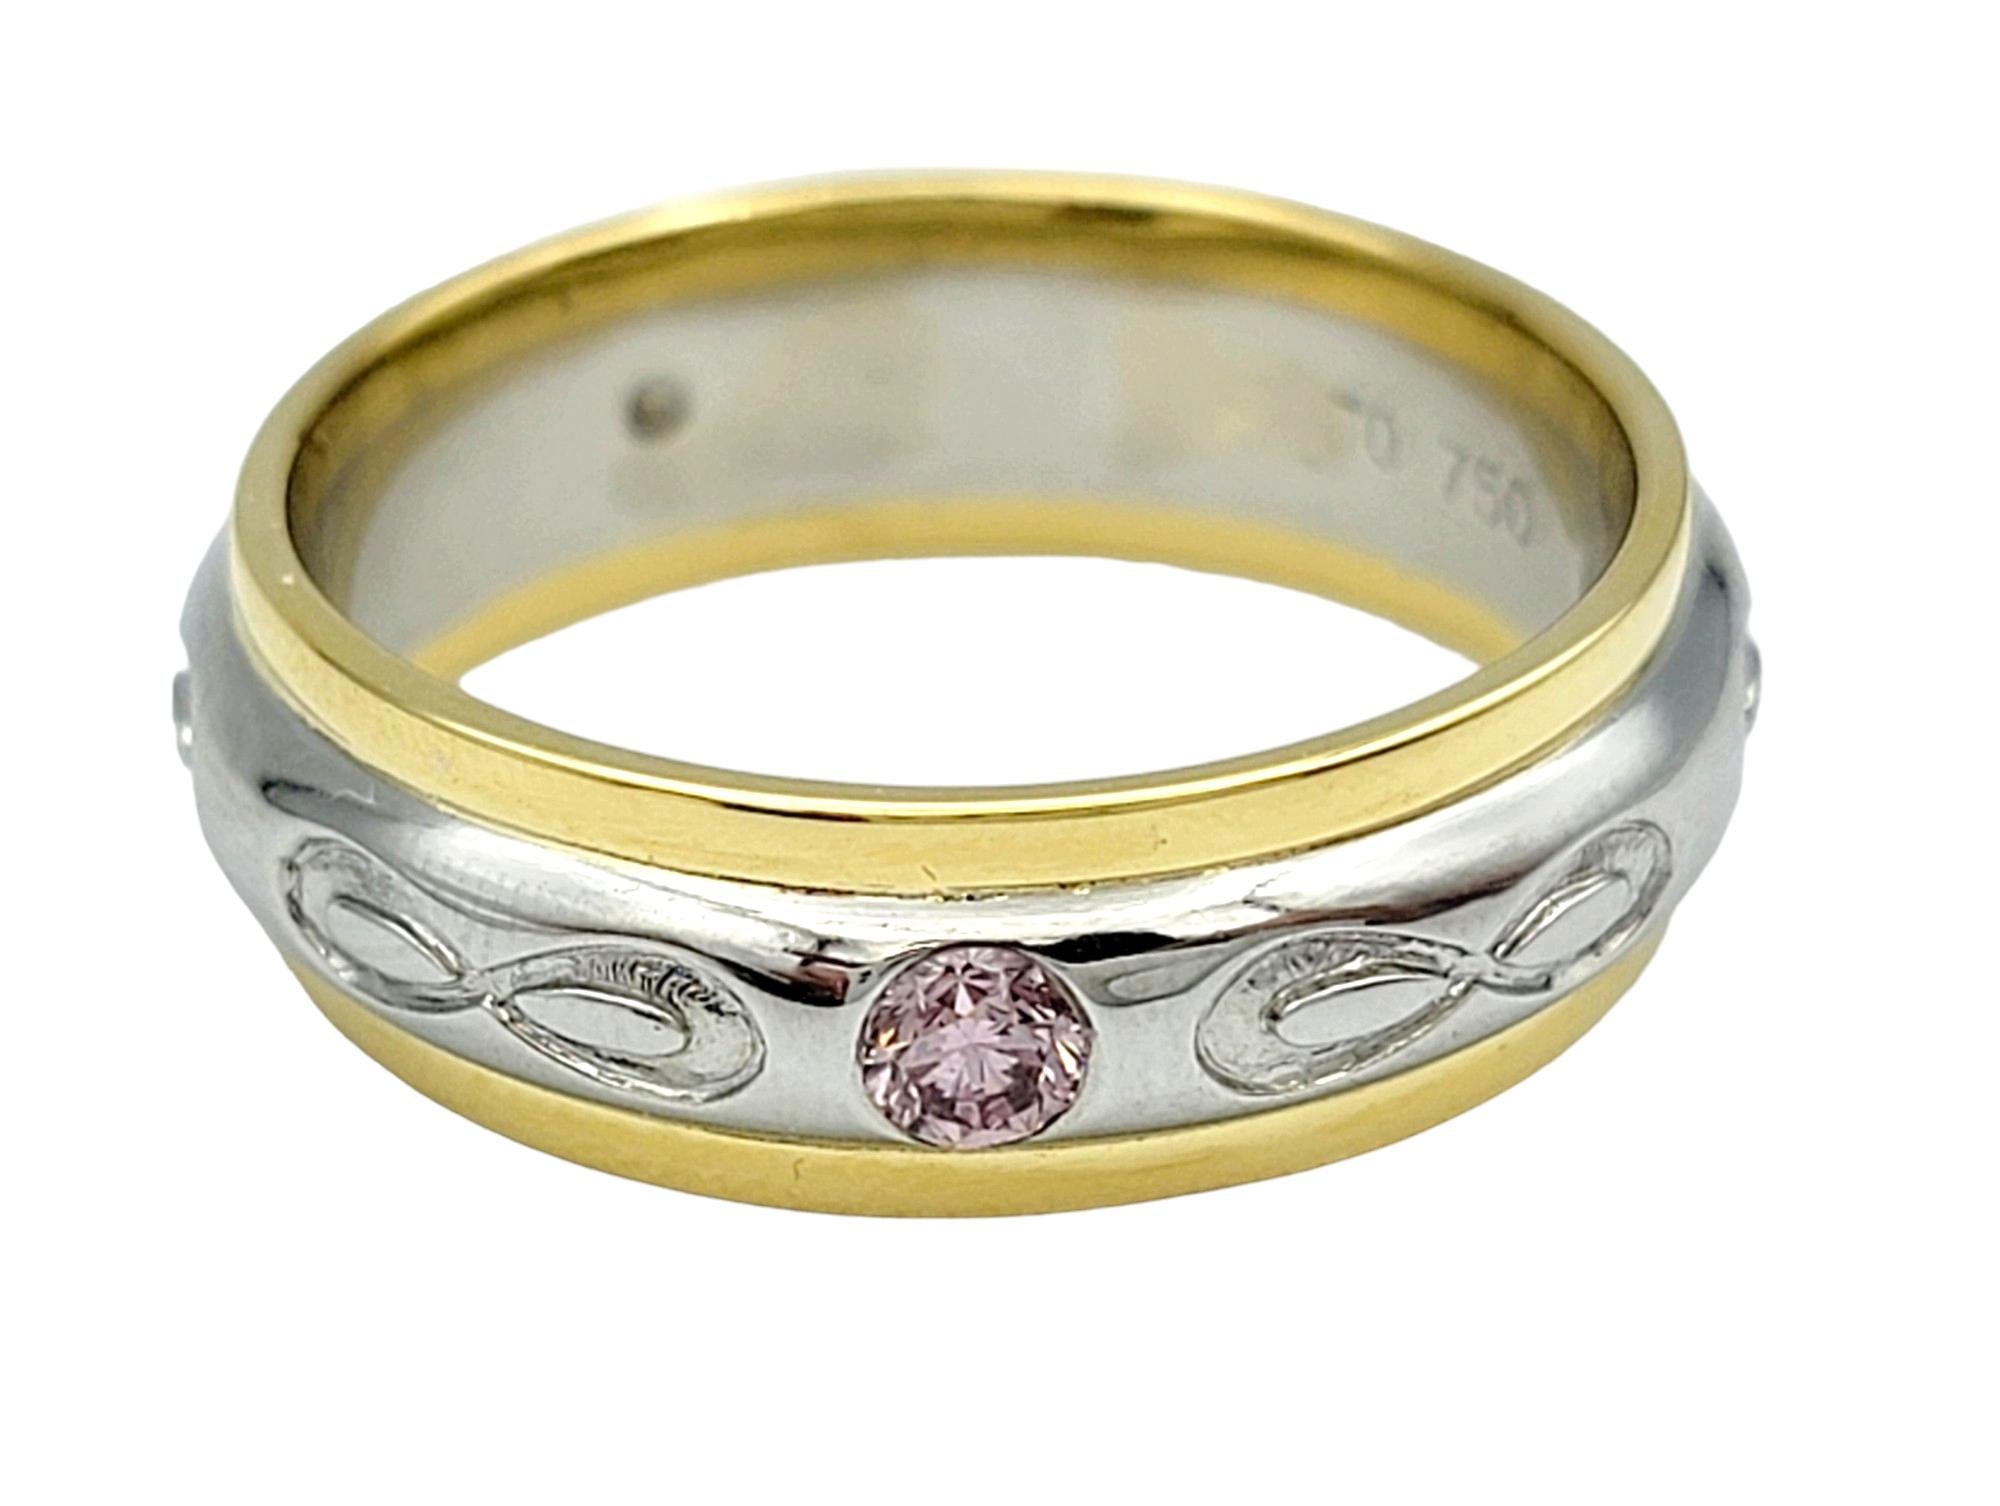 Round Brilliant Pink Diamond Band Ring Set in 18 Karat Yellow Gold and Platinum In Good Condition For Sale In Scottsdale, AZ